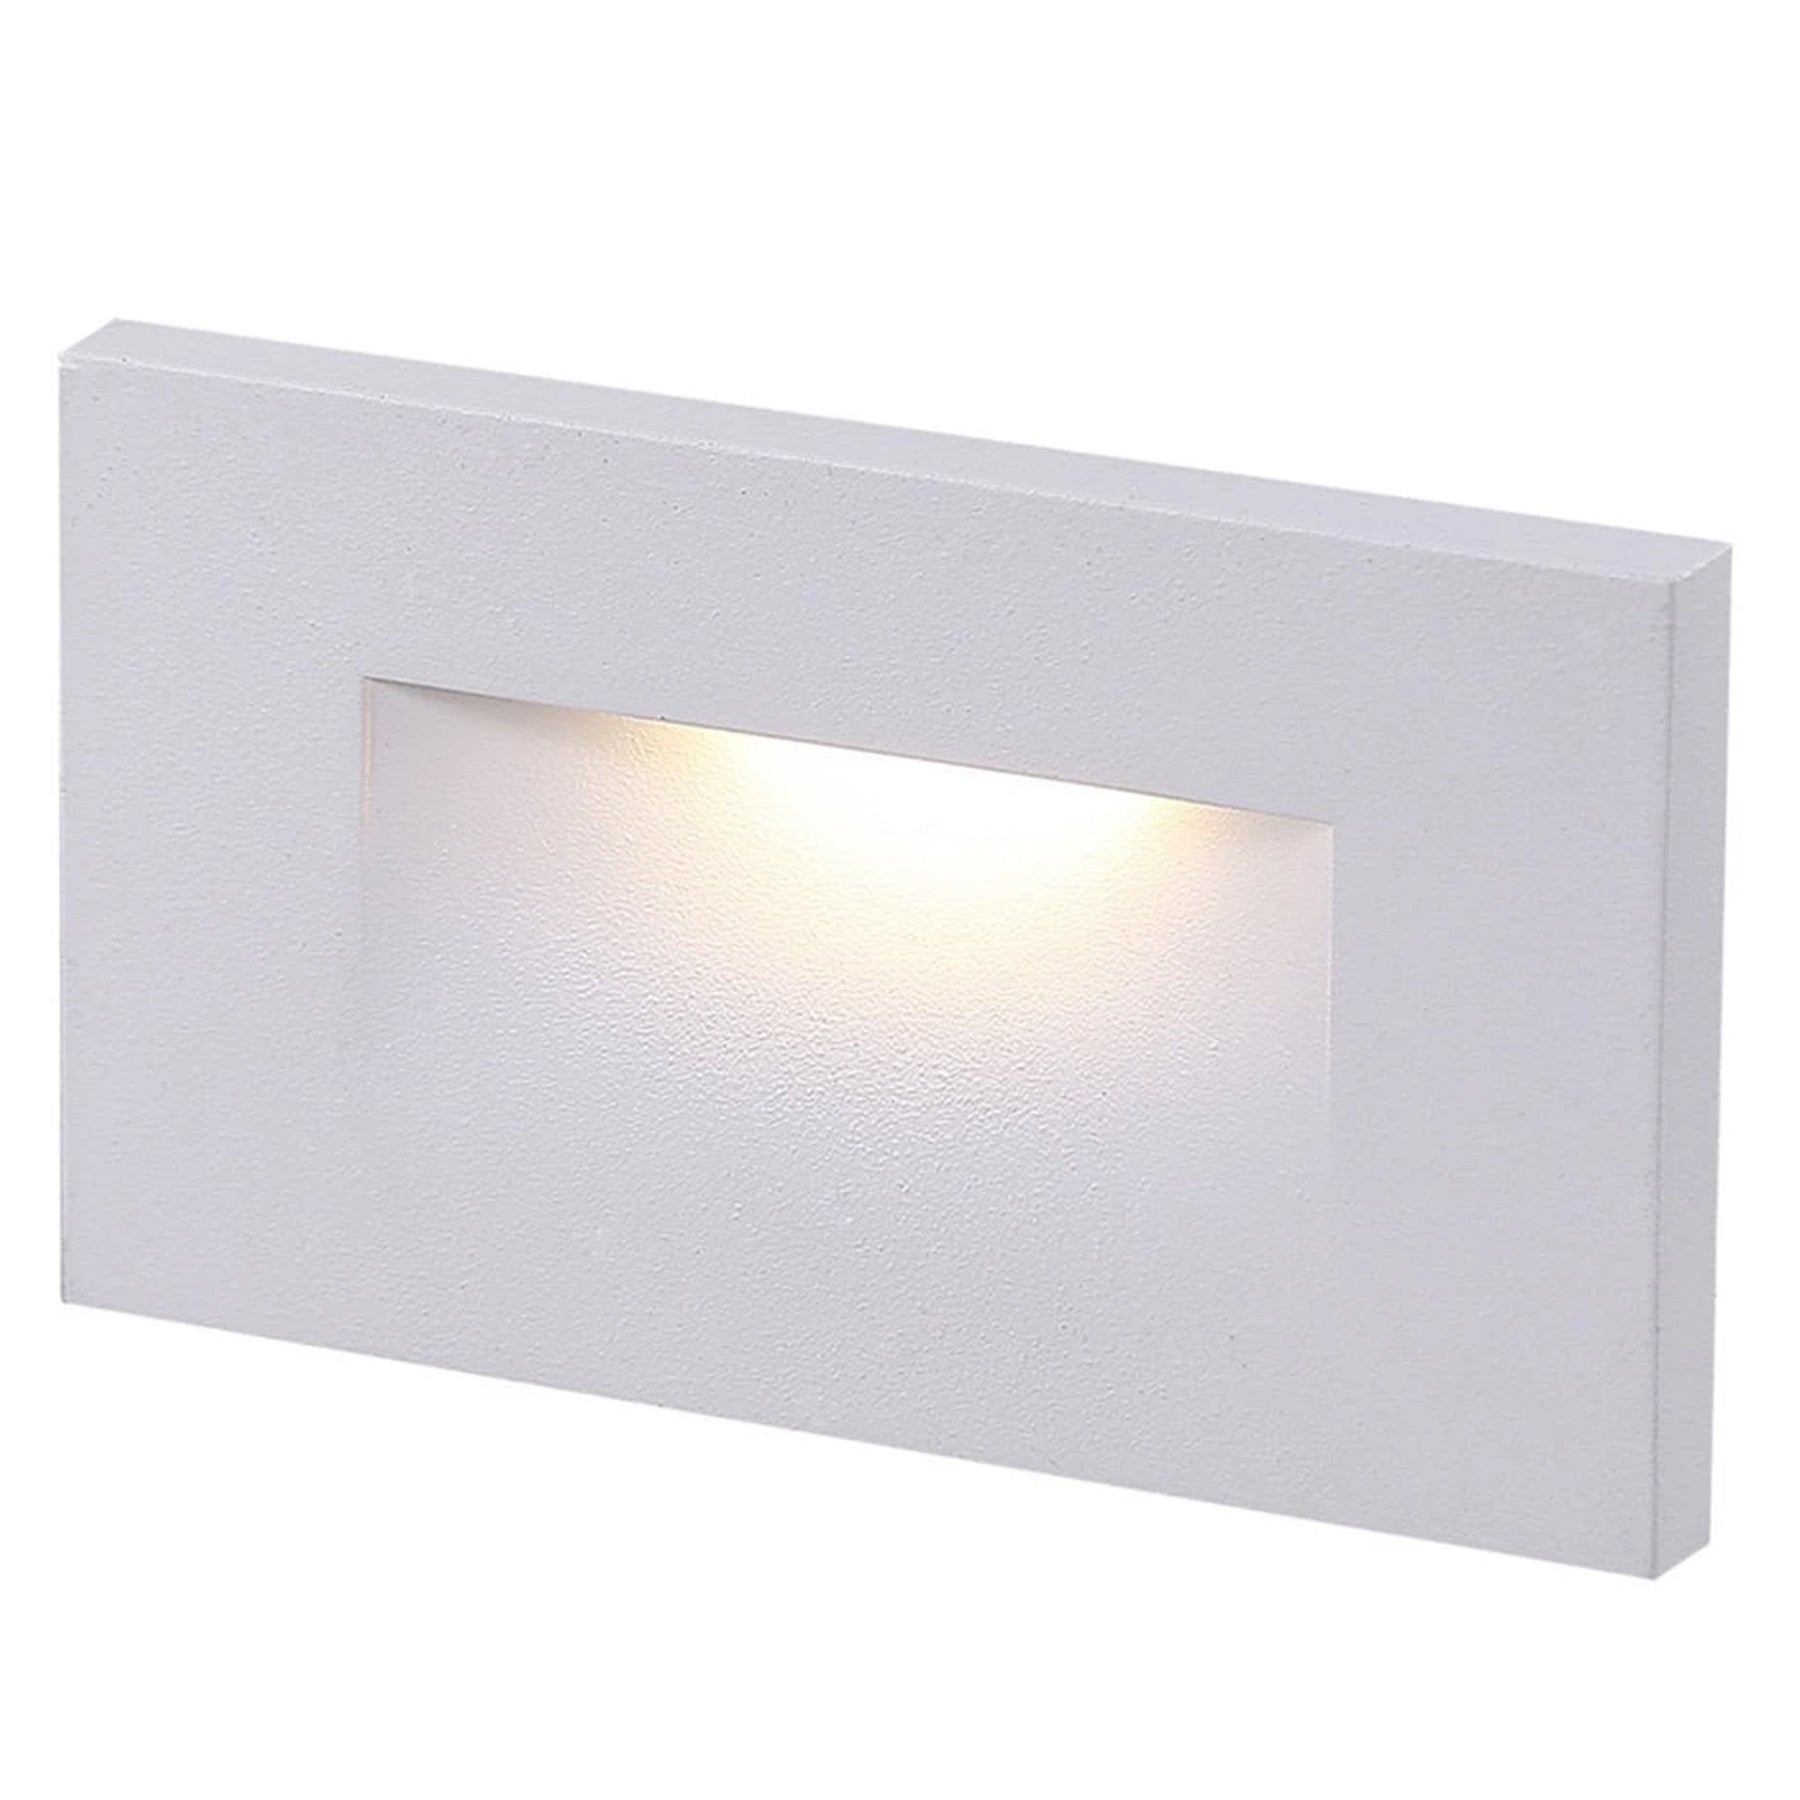 acrylic-led-outdoor-step-lights-3w